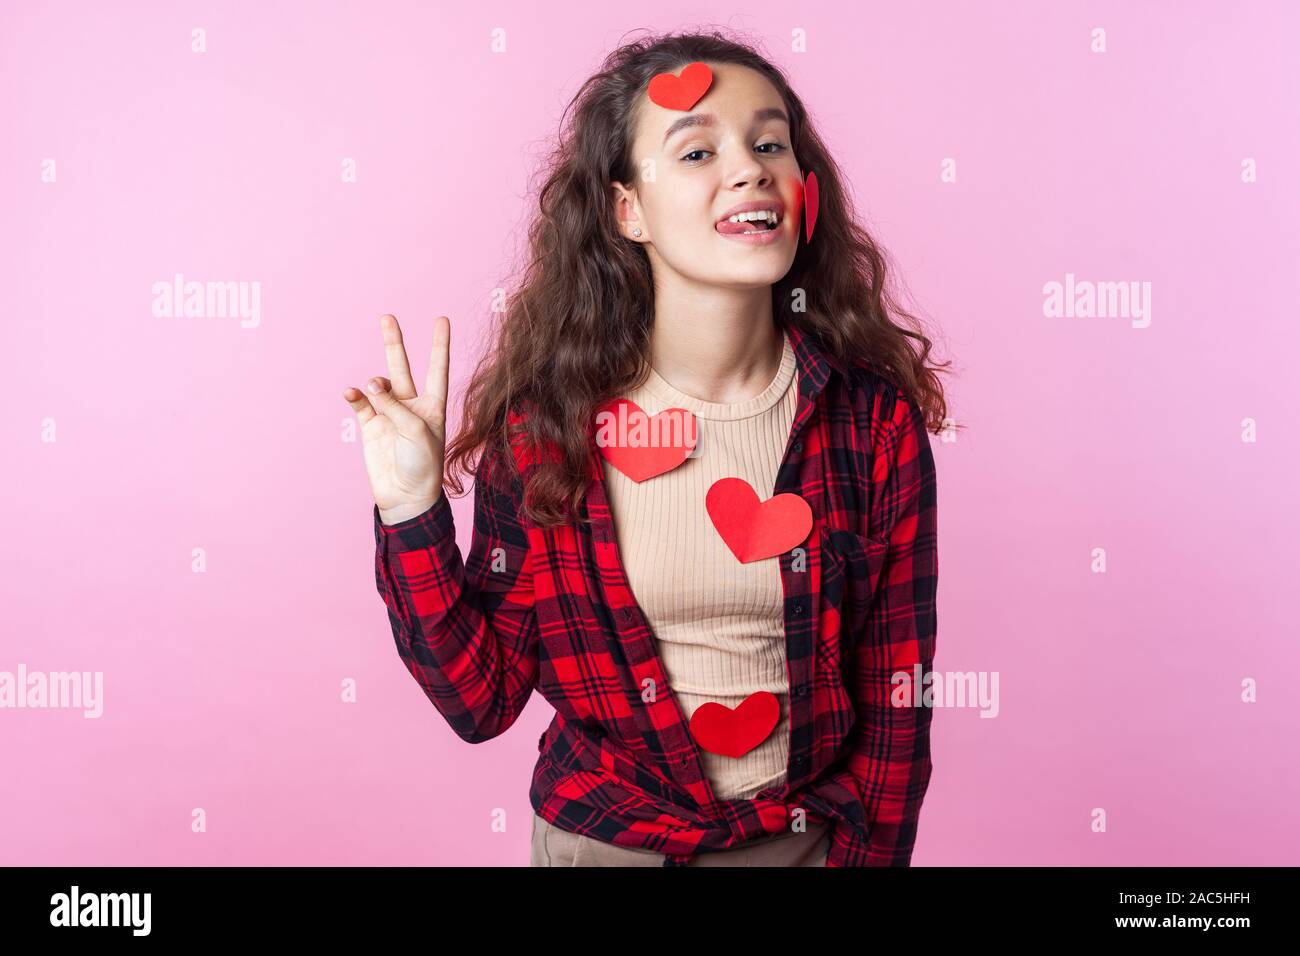 Valentines Day. Portrait of playful cute teen girl with curly brunette hair and paper heart stickers on her face and clothes showing tongue and gestur Stock Photo